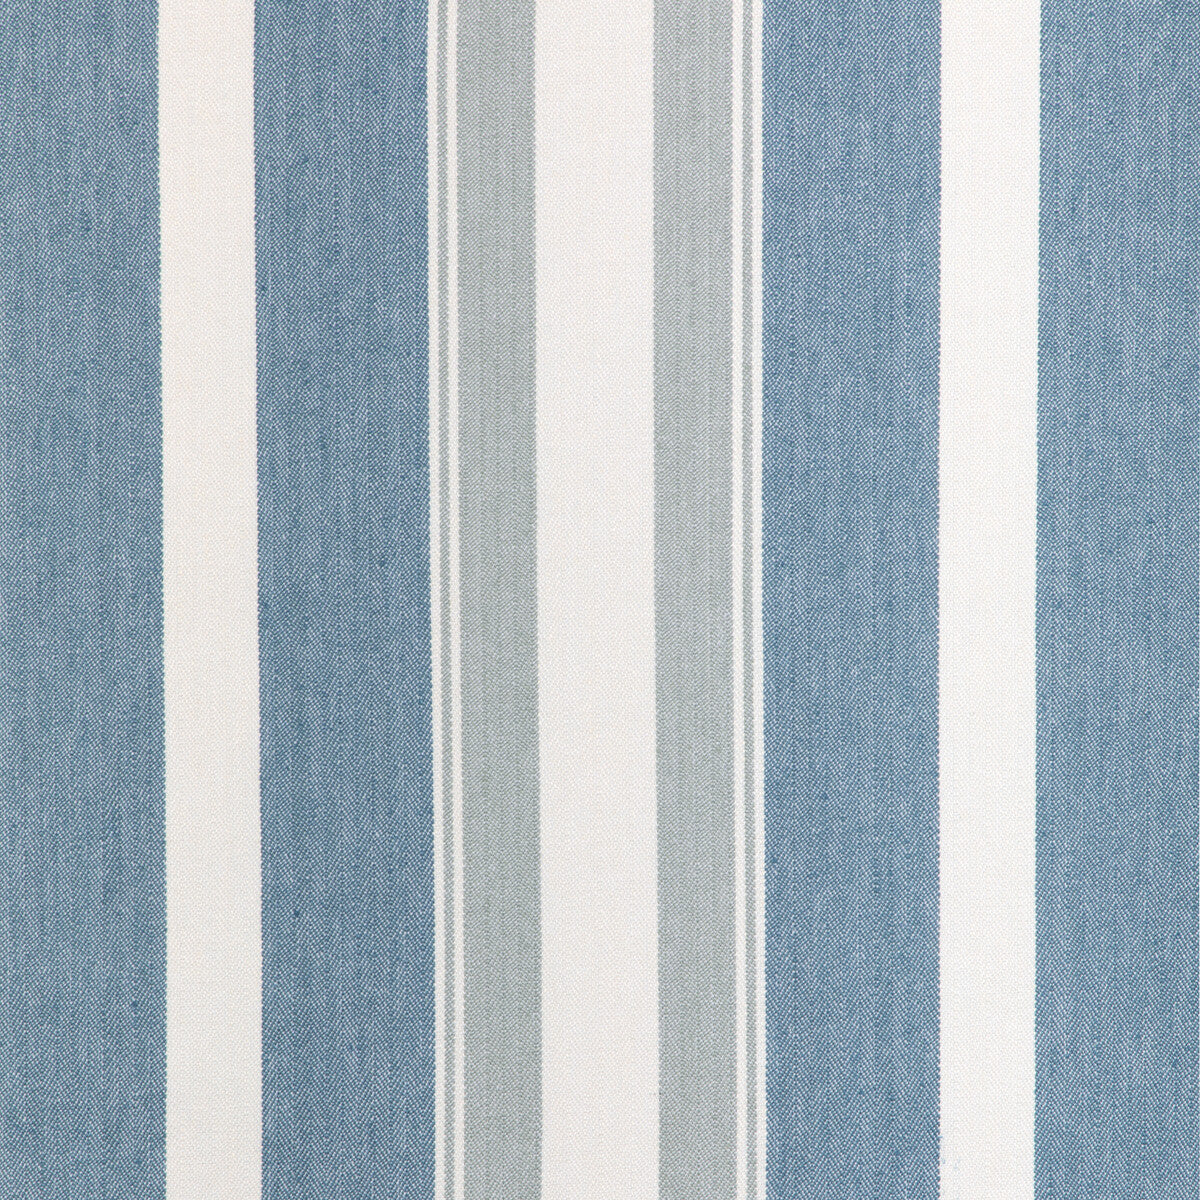 Natural Stripe fabric in lapis color - pattern 36863.5.0 - by Kravet Couture in the Atelier Weaves collection